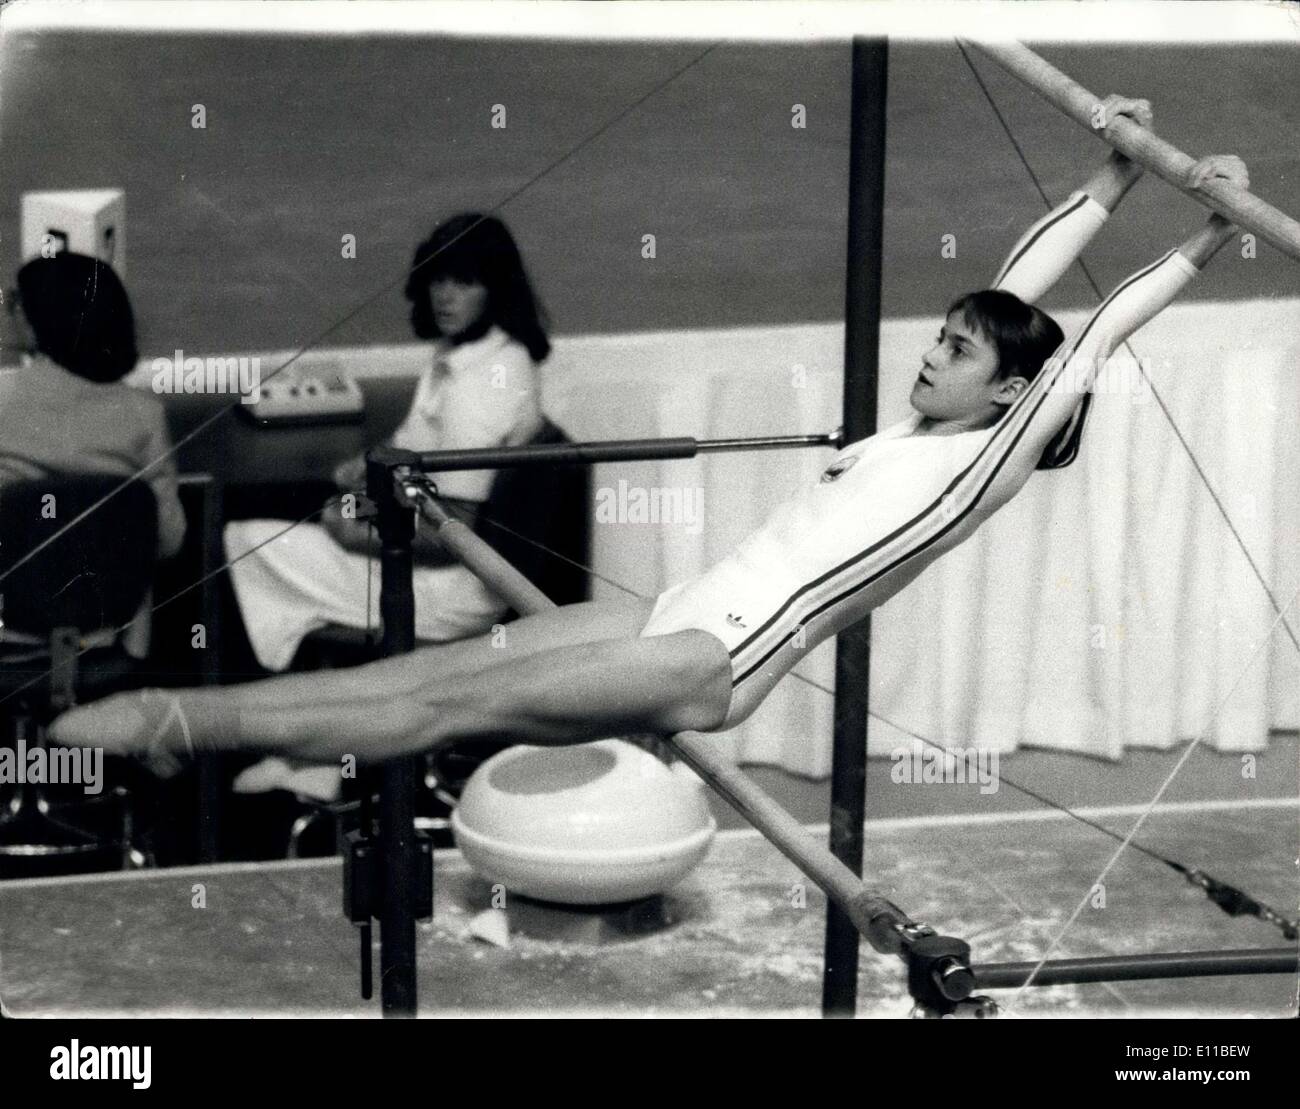 Jul. 22, 1976 - The 1976 Olympic games in Montreal Rumania's Nadia Comaneci the new queen of Gymnasts. Nadia Comaneci, the 14-year-old Rumanian girl, is the new Queen of world gymnastics. She destroyed the Russian stranglehold on this title, dethrowning the Munich Champion, Ludmila Tourischeva. The little Rumanian scored a maximum ten out of ten on the beam and ther bars to win the gold medal with 39.75 points last night to total 79.275 out of a possible 80. Photo shows 14-year-old Nadia Comaneci of Rumania, seen during her wonderful performance on the asym - metric bars. Stock Photo